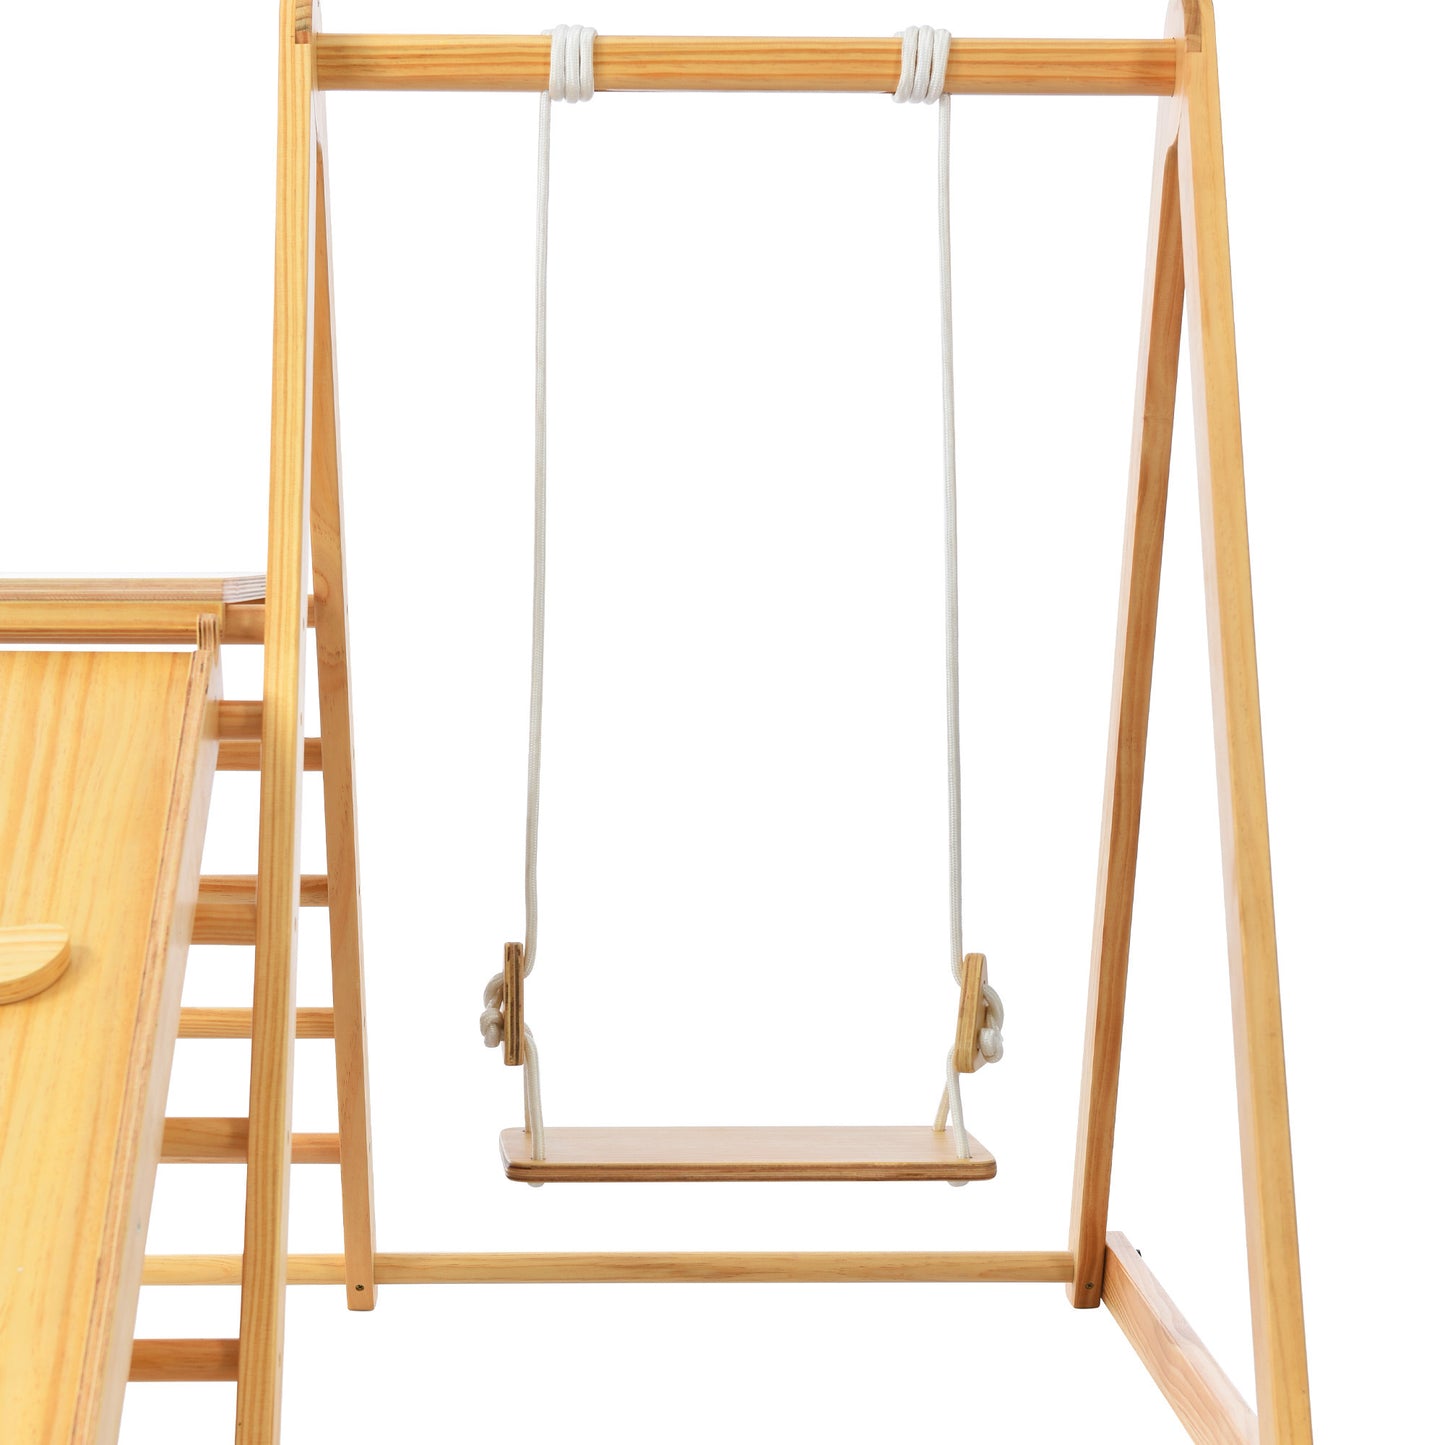 Wooden Swing and Slide Set Indoor Foldable Climbing Playground Playset for Kids, Wooden Climbing Toys with Rock Climb Ramp for Toddlers